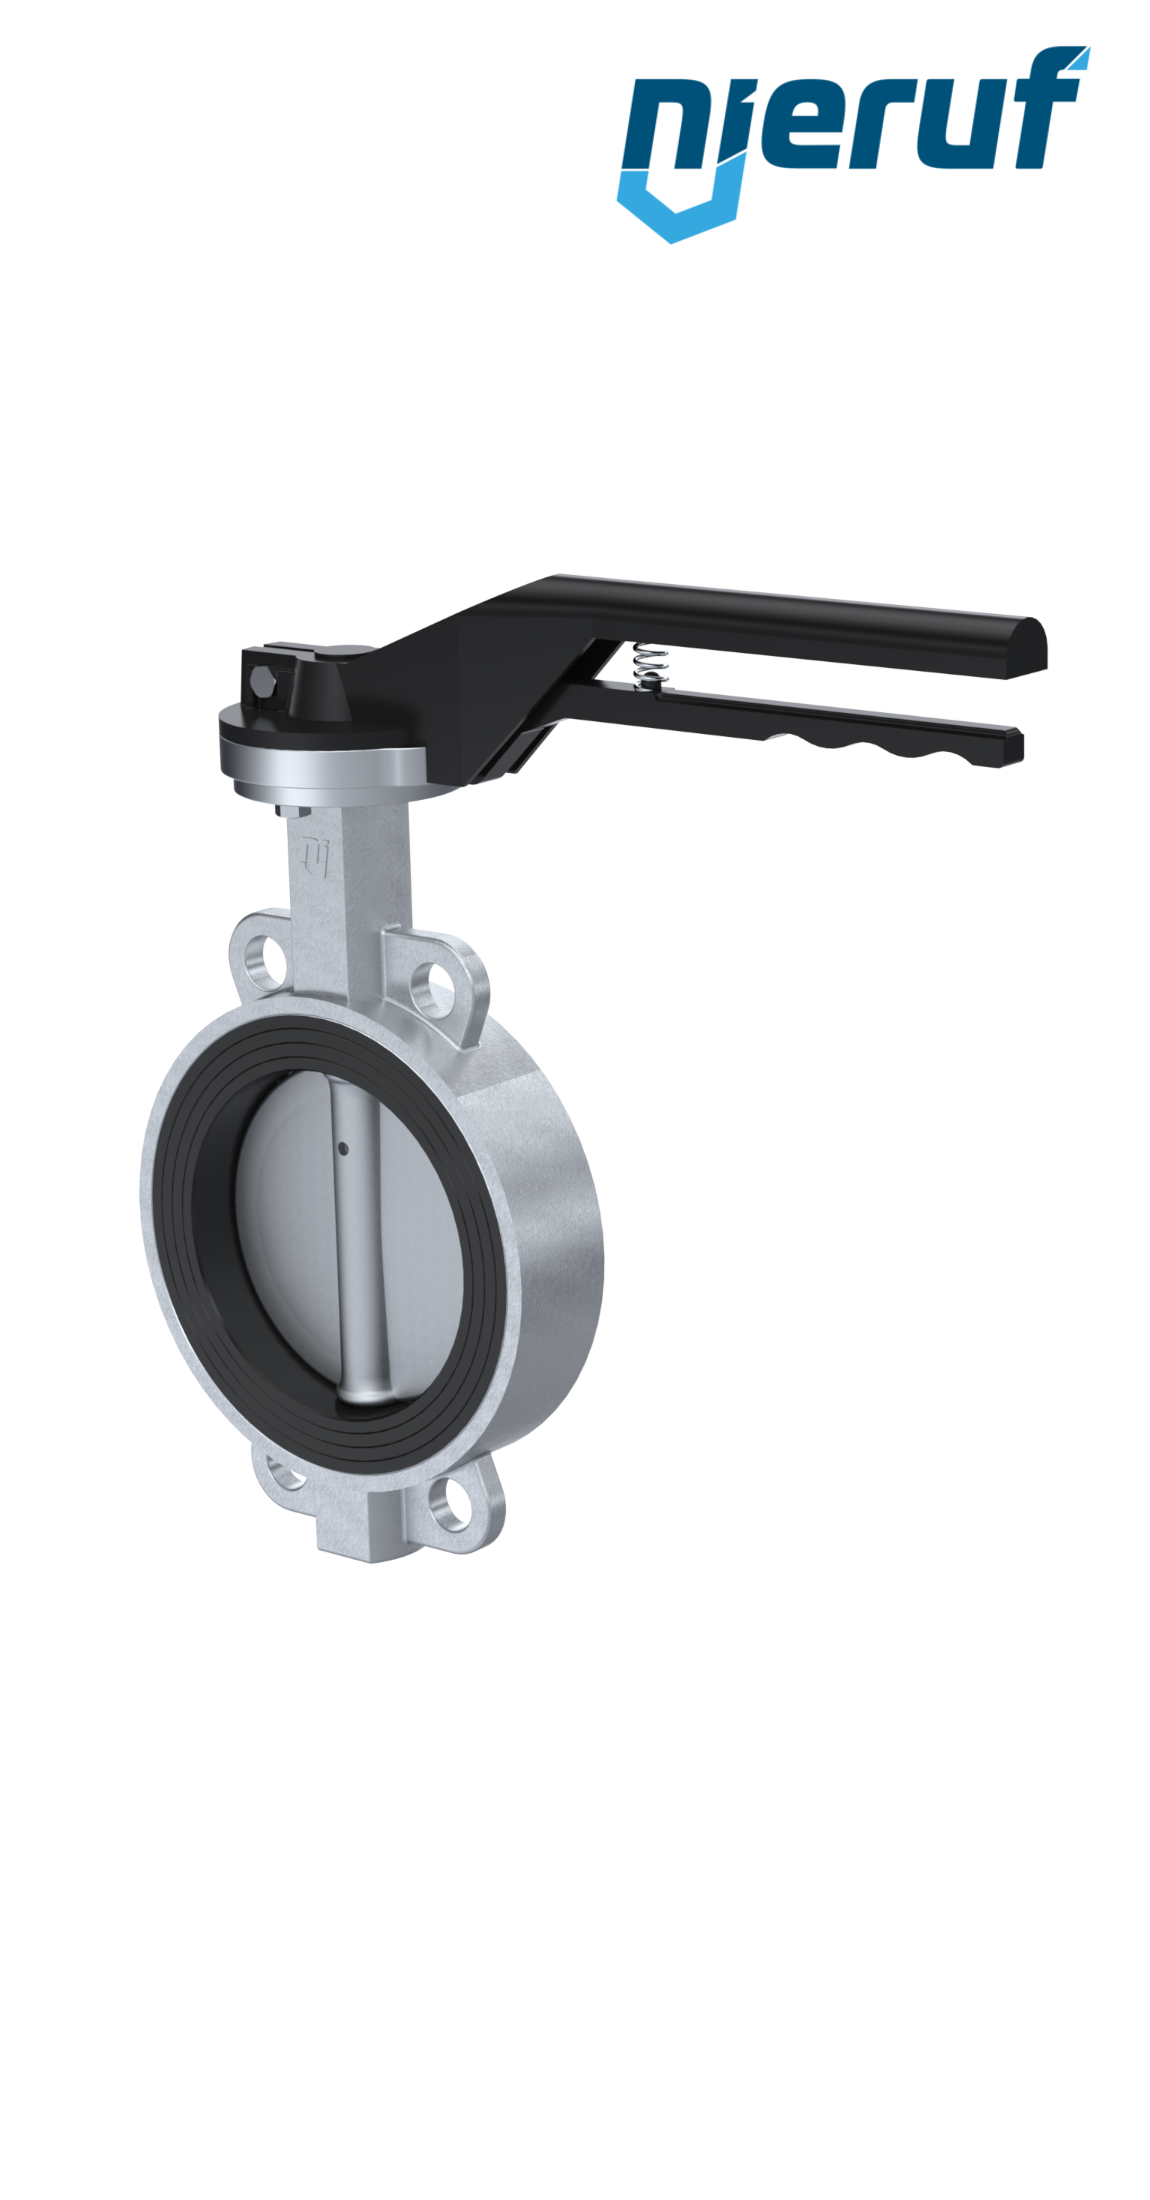 Butterfly-valve-stainless-steel DN 65 PN16 AK08 EPDM notch lever